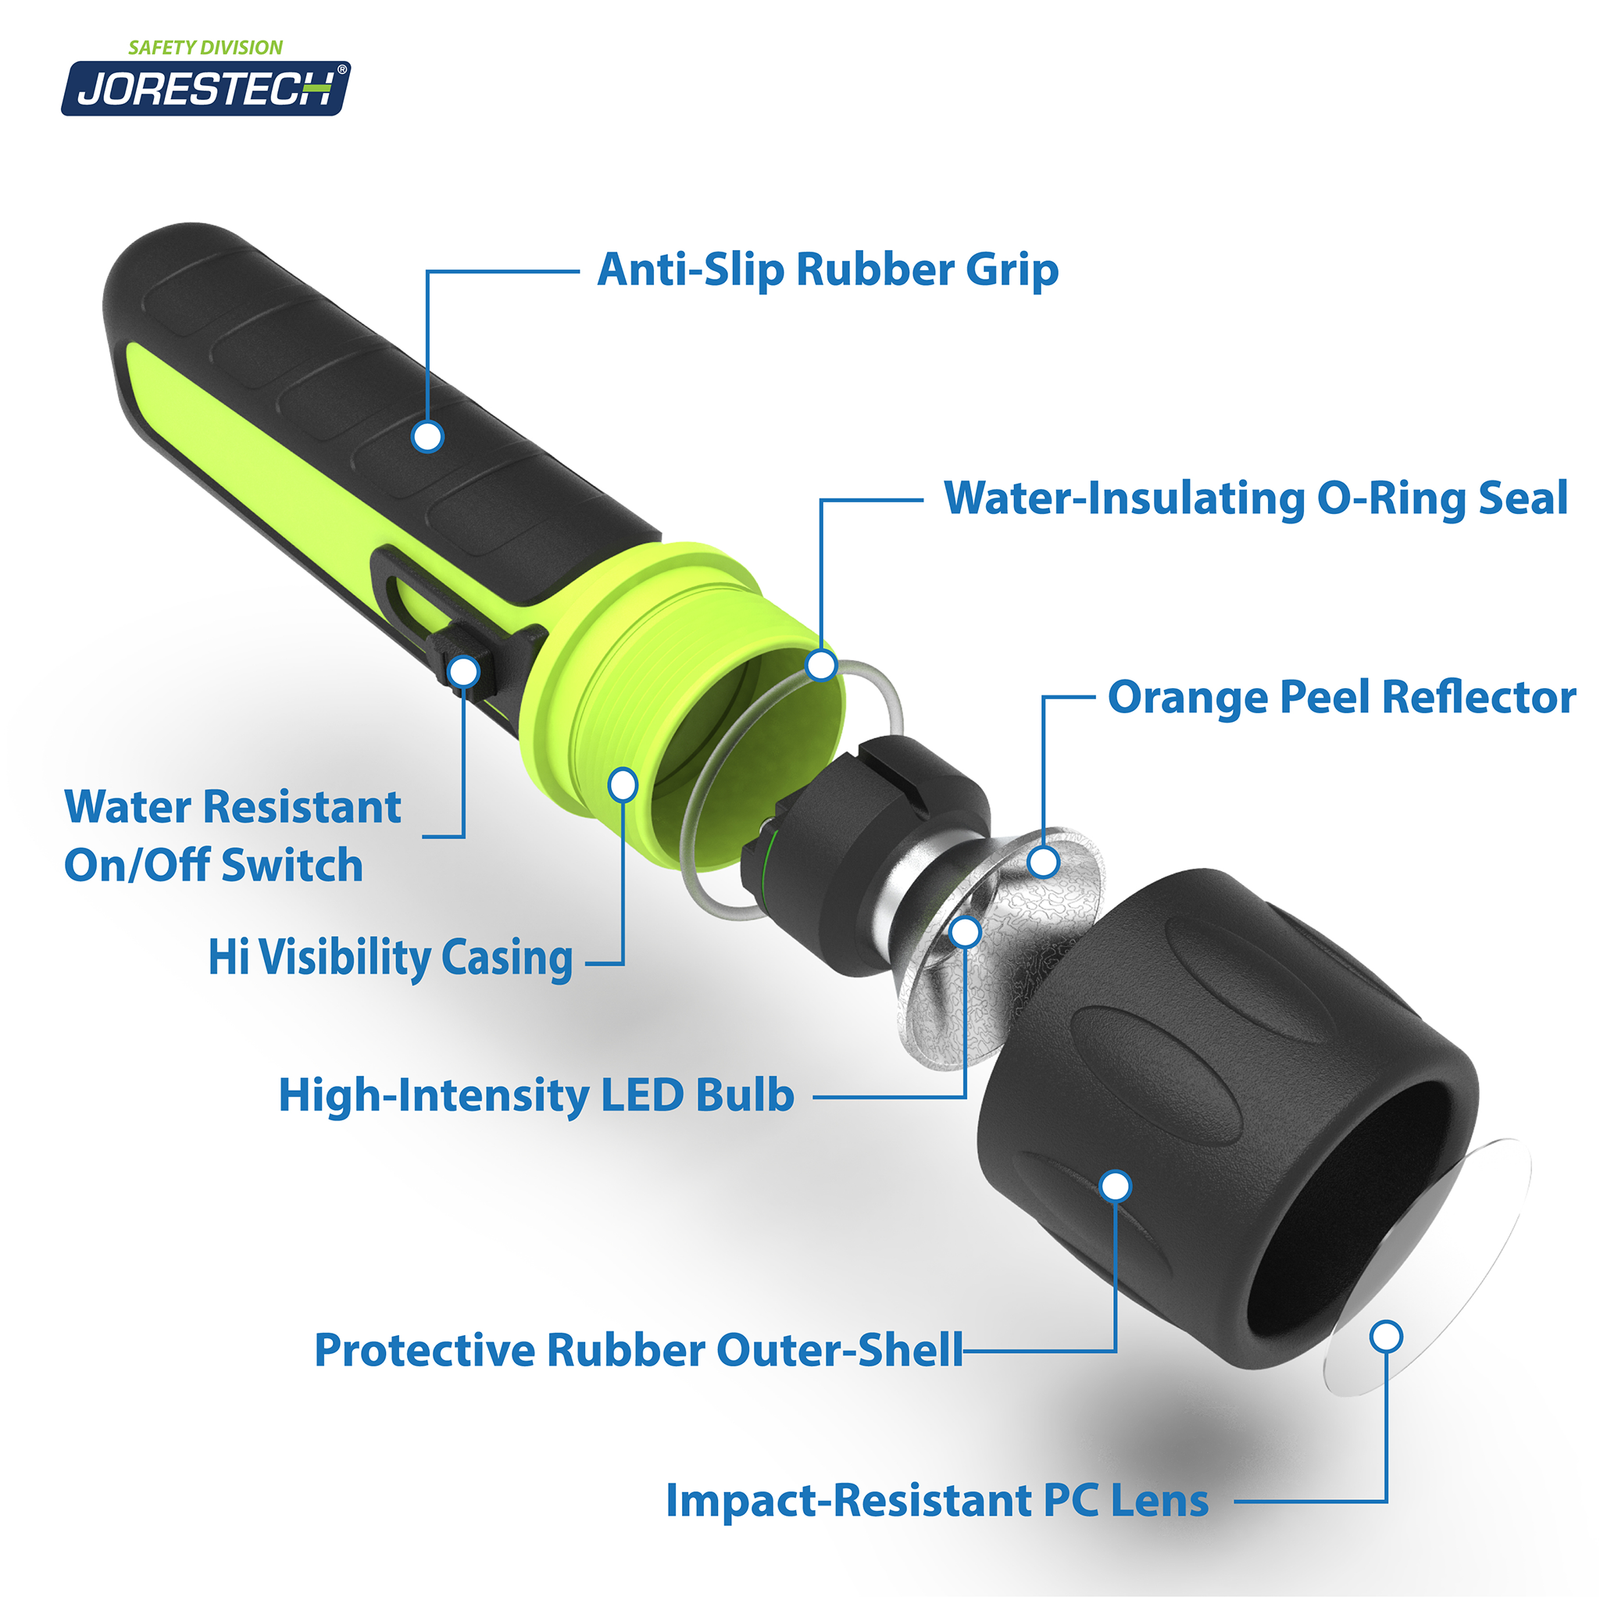 Features the parts of the waterproof flashlight. Call out mention: anti-slip rubber grip. Water insulating O-ring seal. range peel reflector. Impact resistant PC lens. Protective rubber outer shell. High intensity LED Bulb. Hi visibility casing. Water resistant On/off switch.